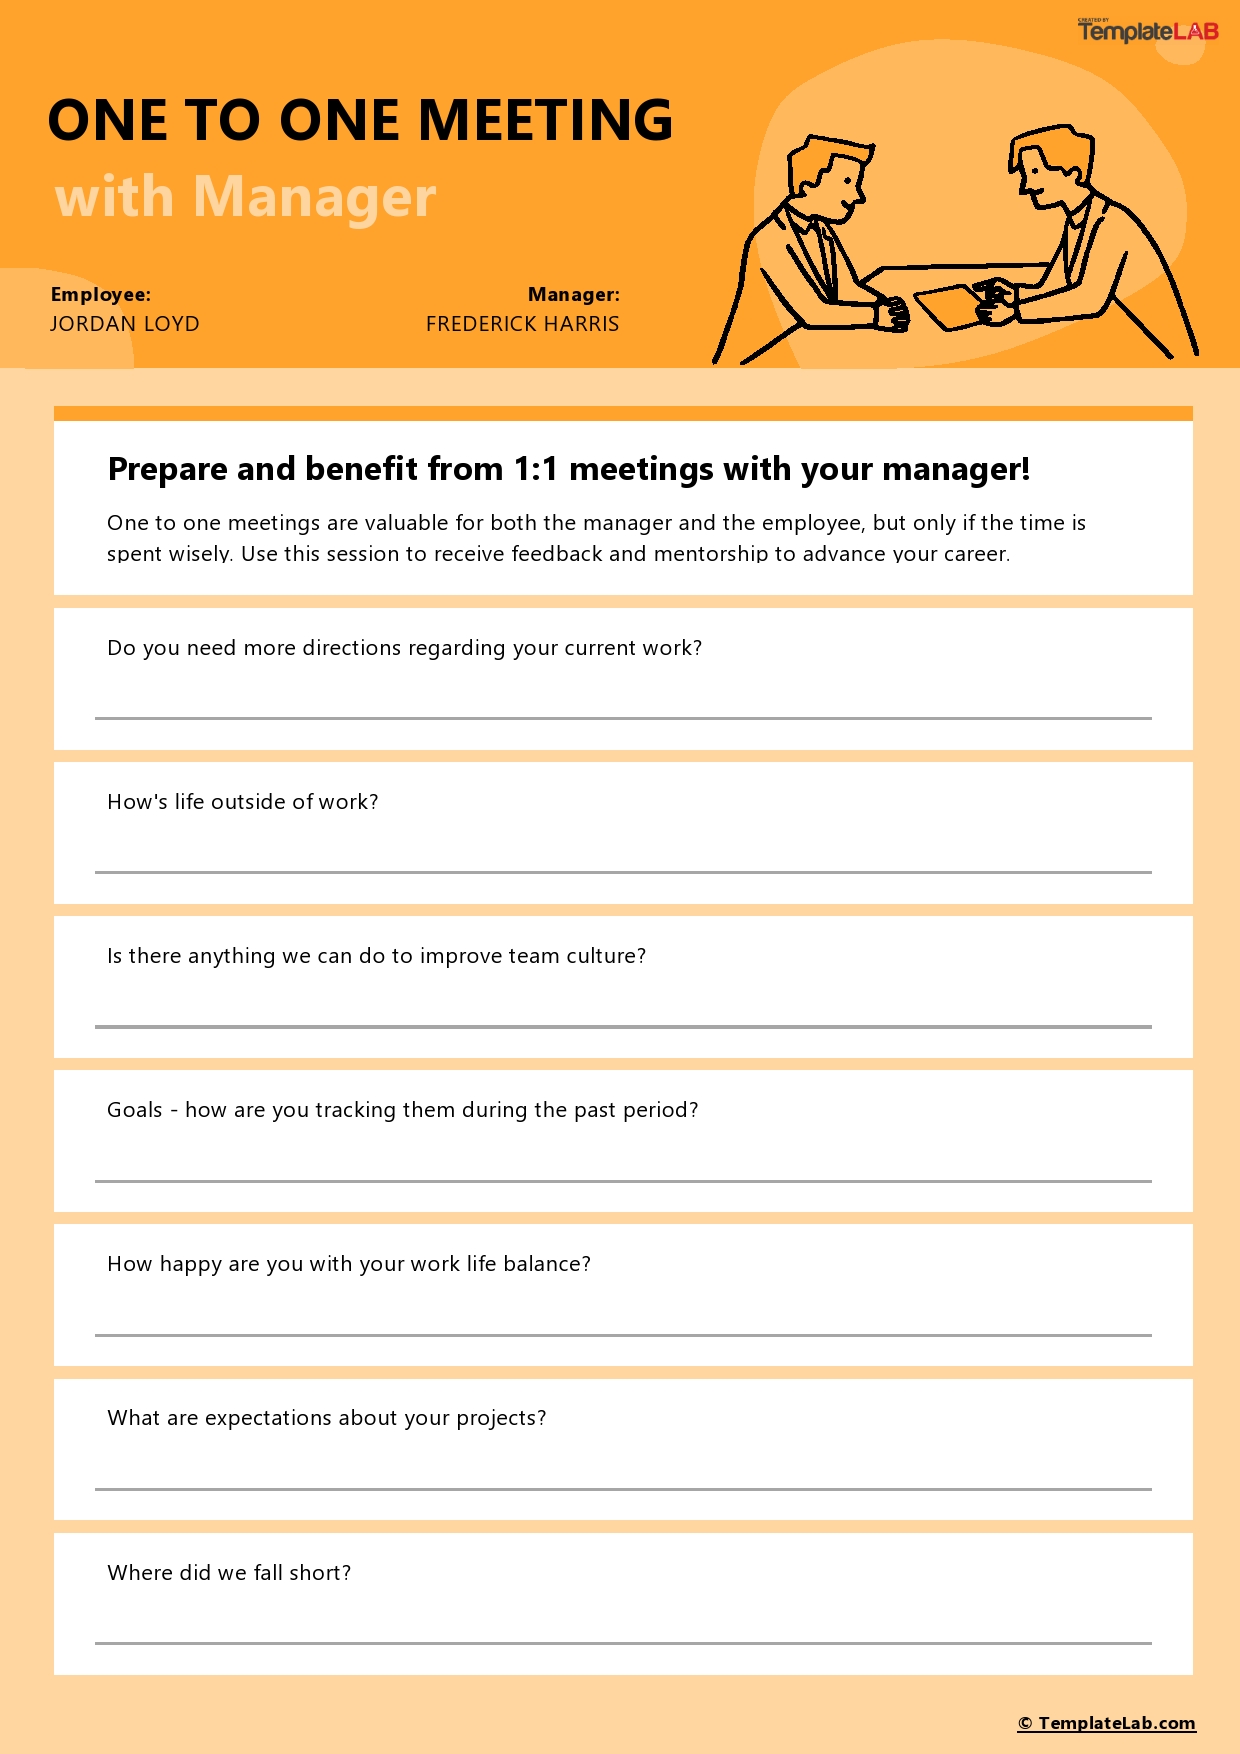 Free One to One Meeting with Manager Template